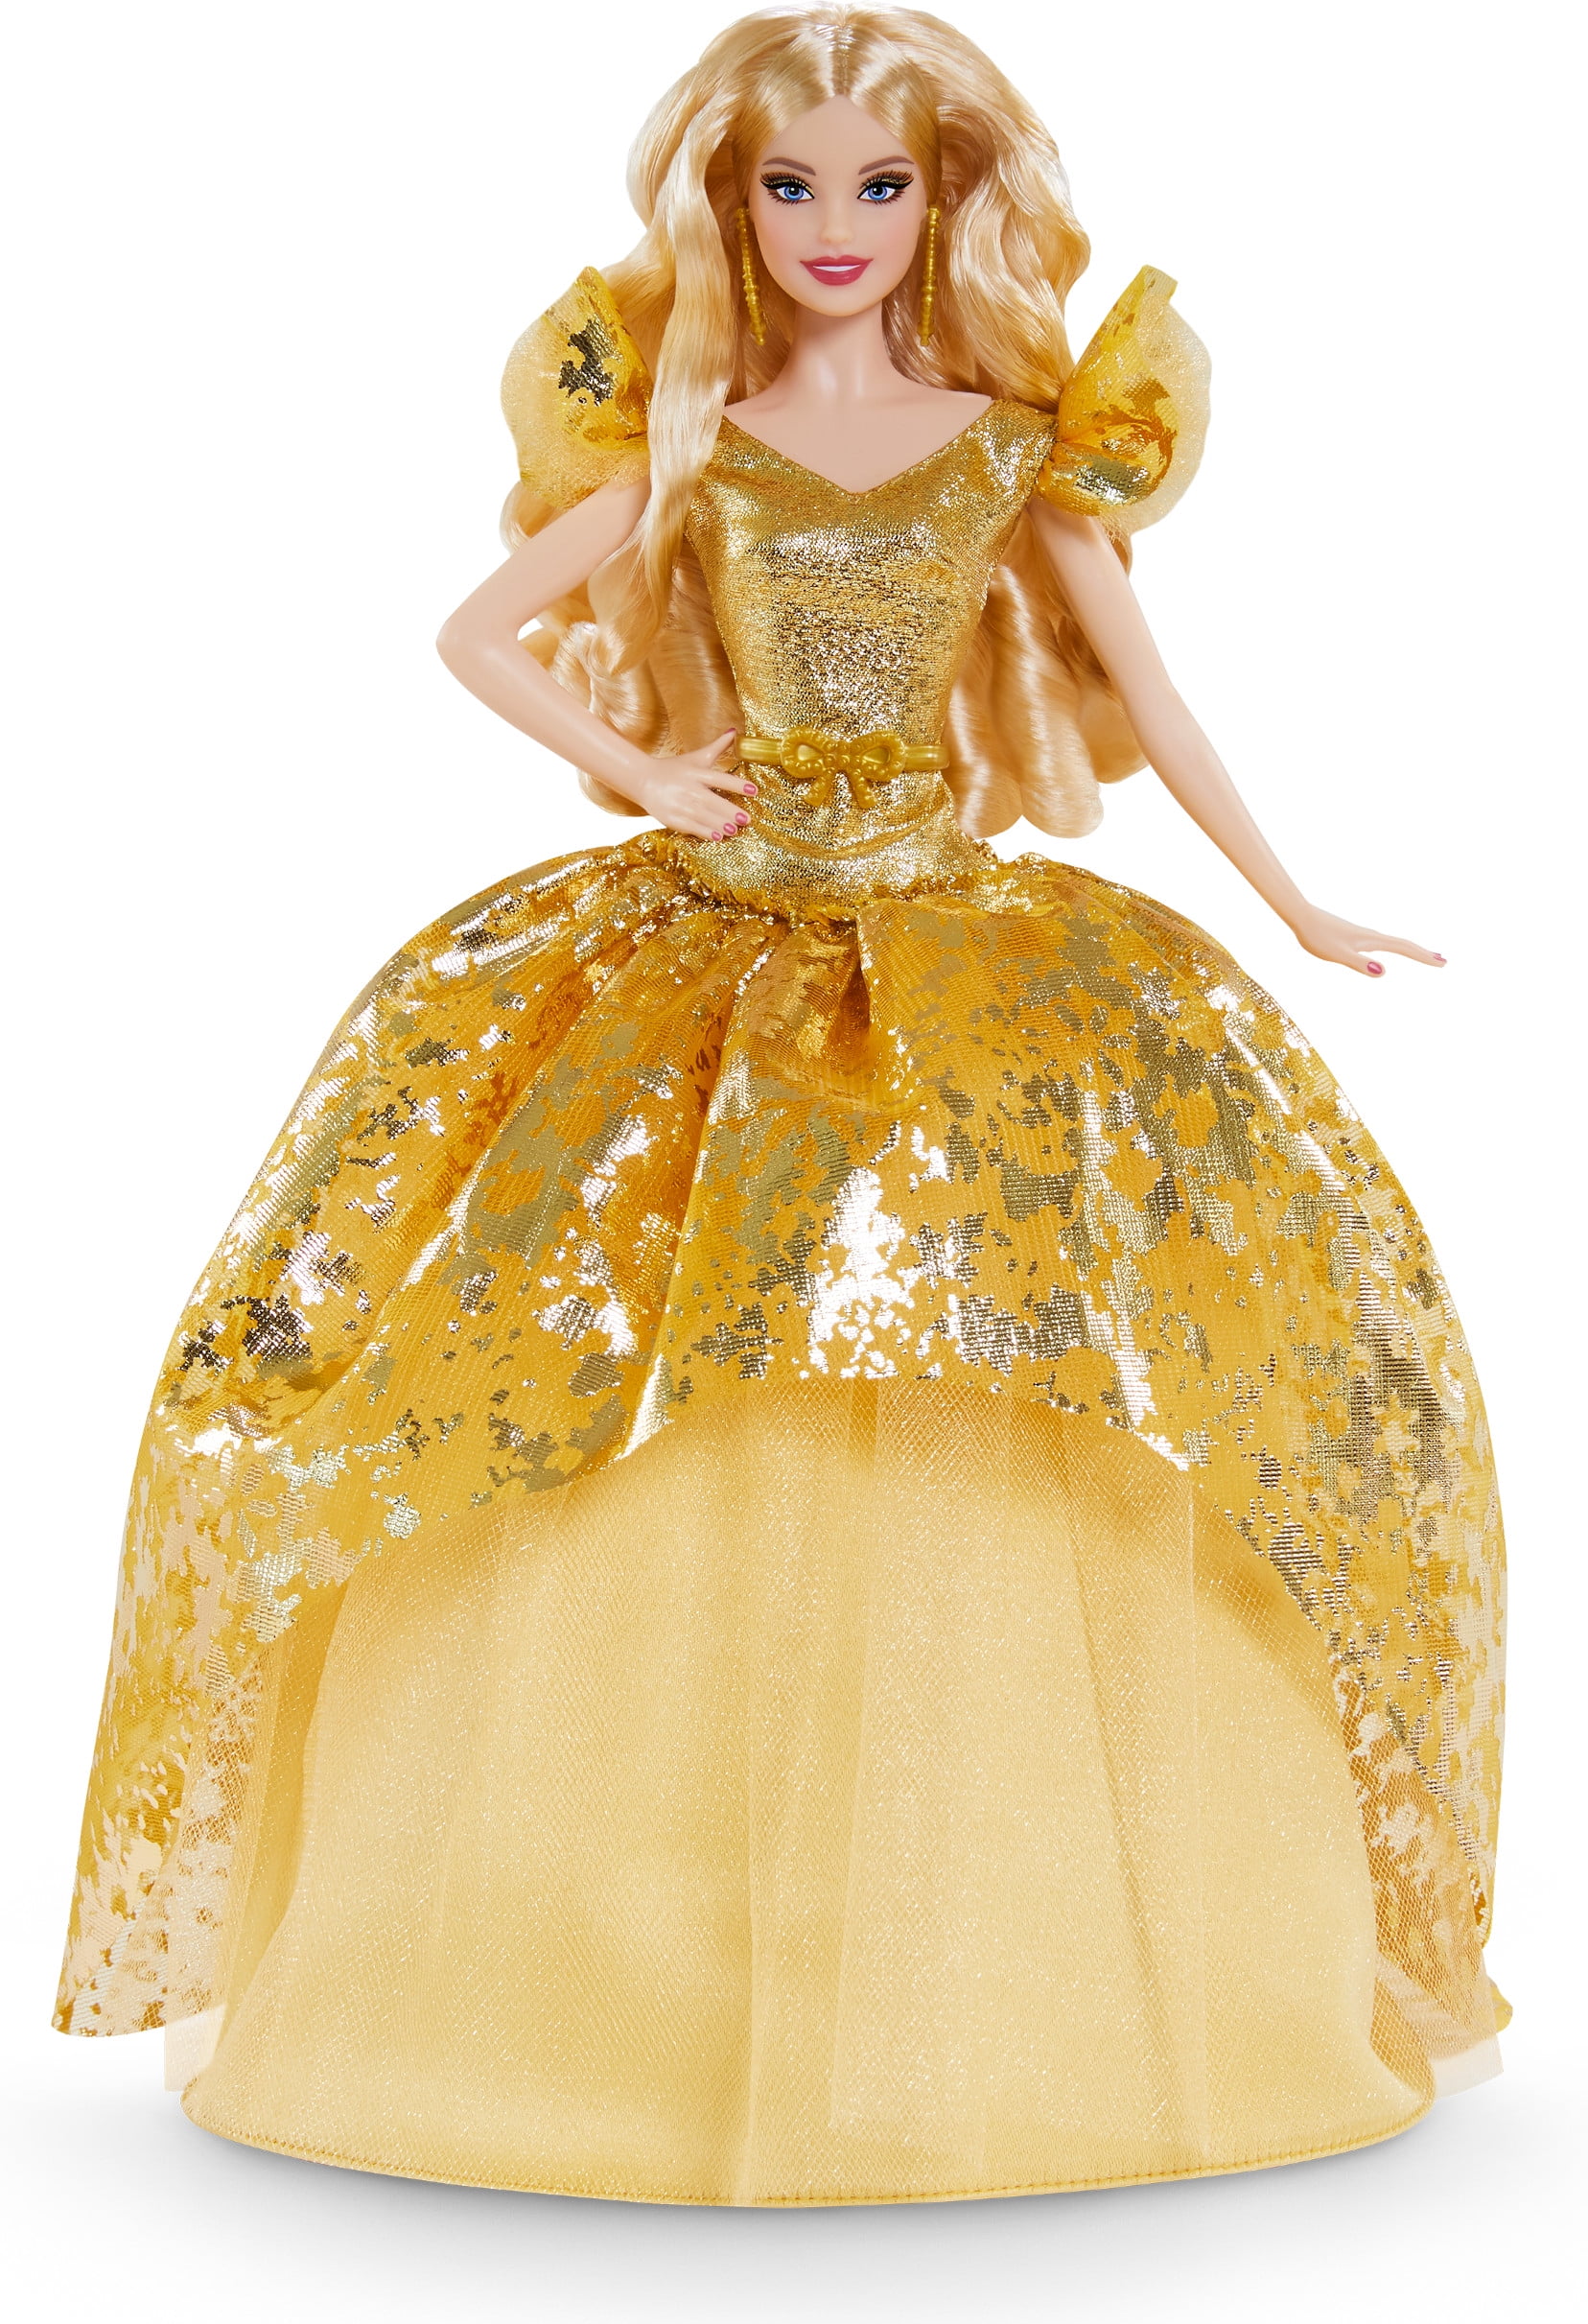 barbie-signature-2020-holiday-barbie-doll-12-inch-blonde-long-hair-in-golden-gown-walmart